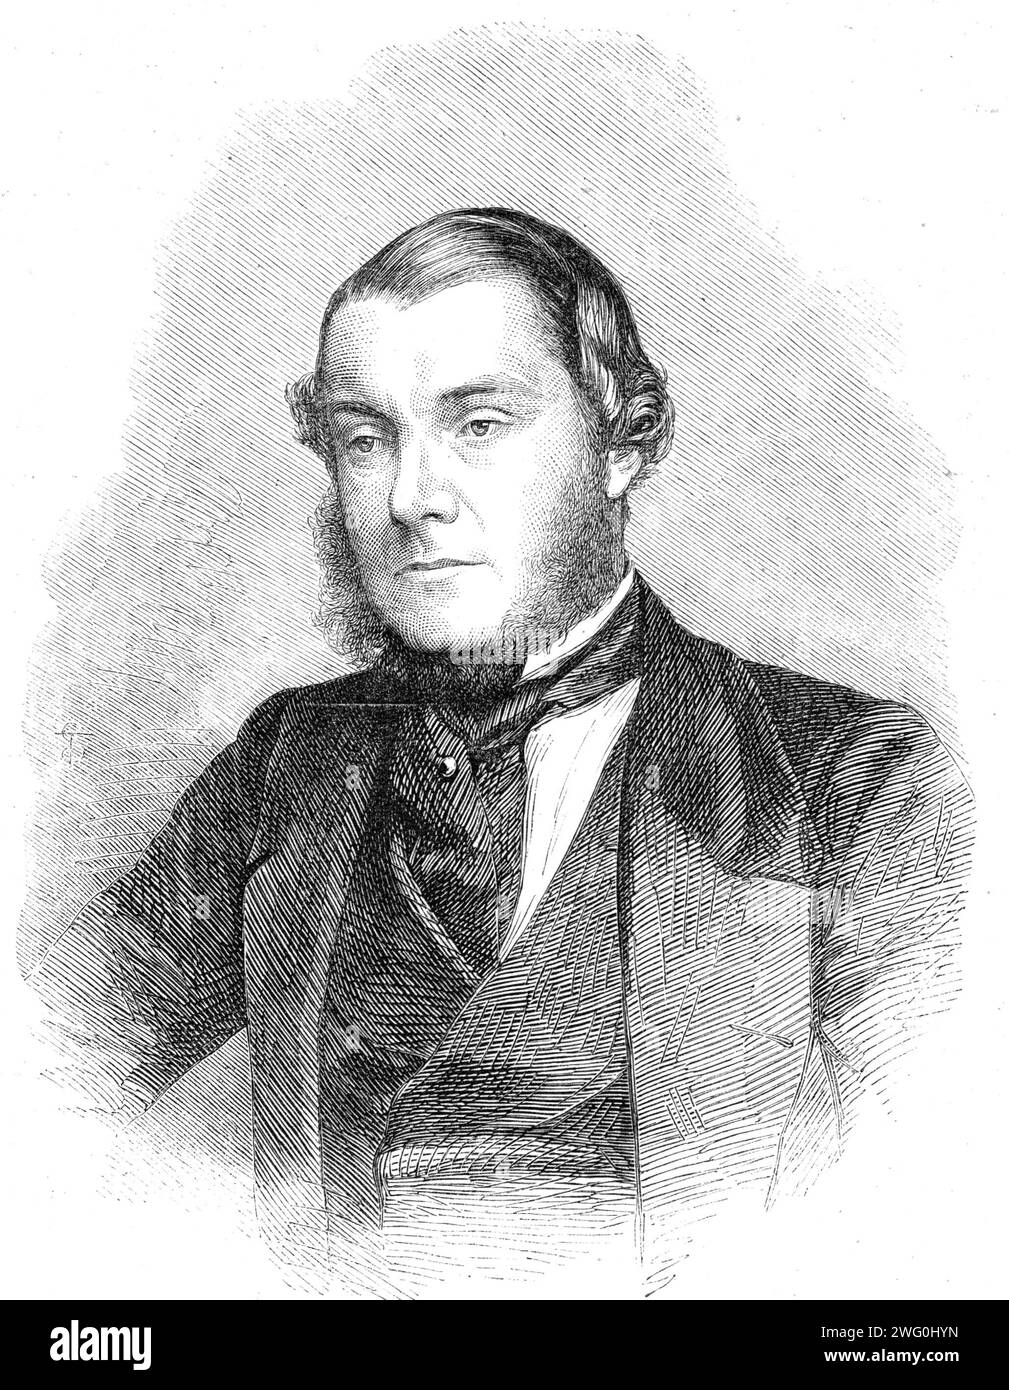 The late Mr. John Nesbit, Professor of Chemistry and Principal of Kennington Agricultural College, 1862. '...at the age of fifteen he made an electric-battery which was purchased by the Mechanics' Institute...and proved his introduction to the place where in after years he commenced his career as a public lecturer...he was...[taught by] the celebrated Dr. Dalton, the founder of the atomic theory... He travelled everywhere through the agricultural districts, and thus acquired that sound knowledge of practical farming which he soon learnt so well to blend with scientific chemistry...Geology was Stock Photo